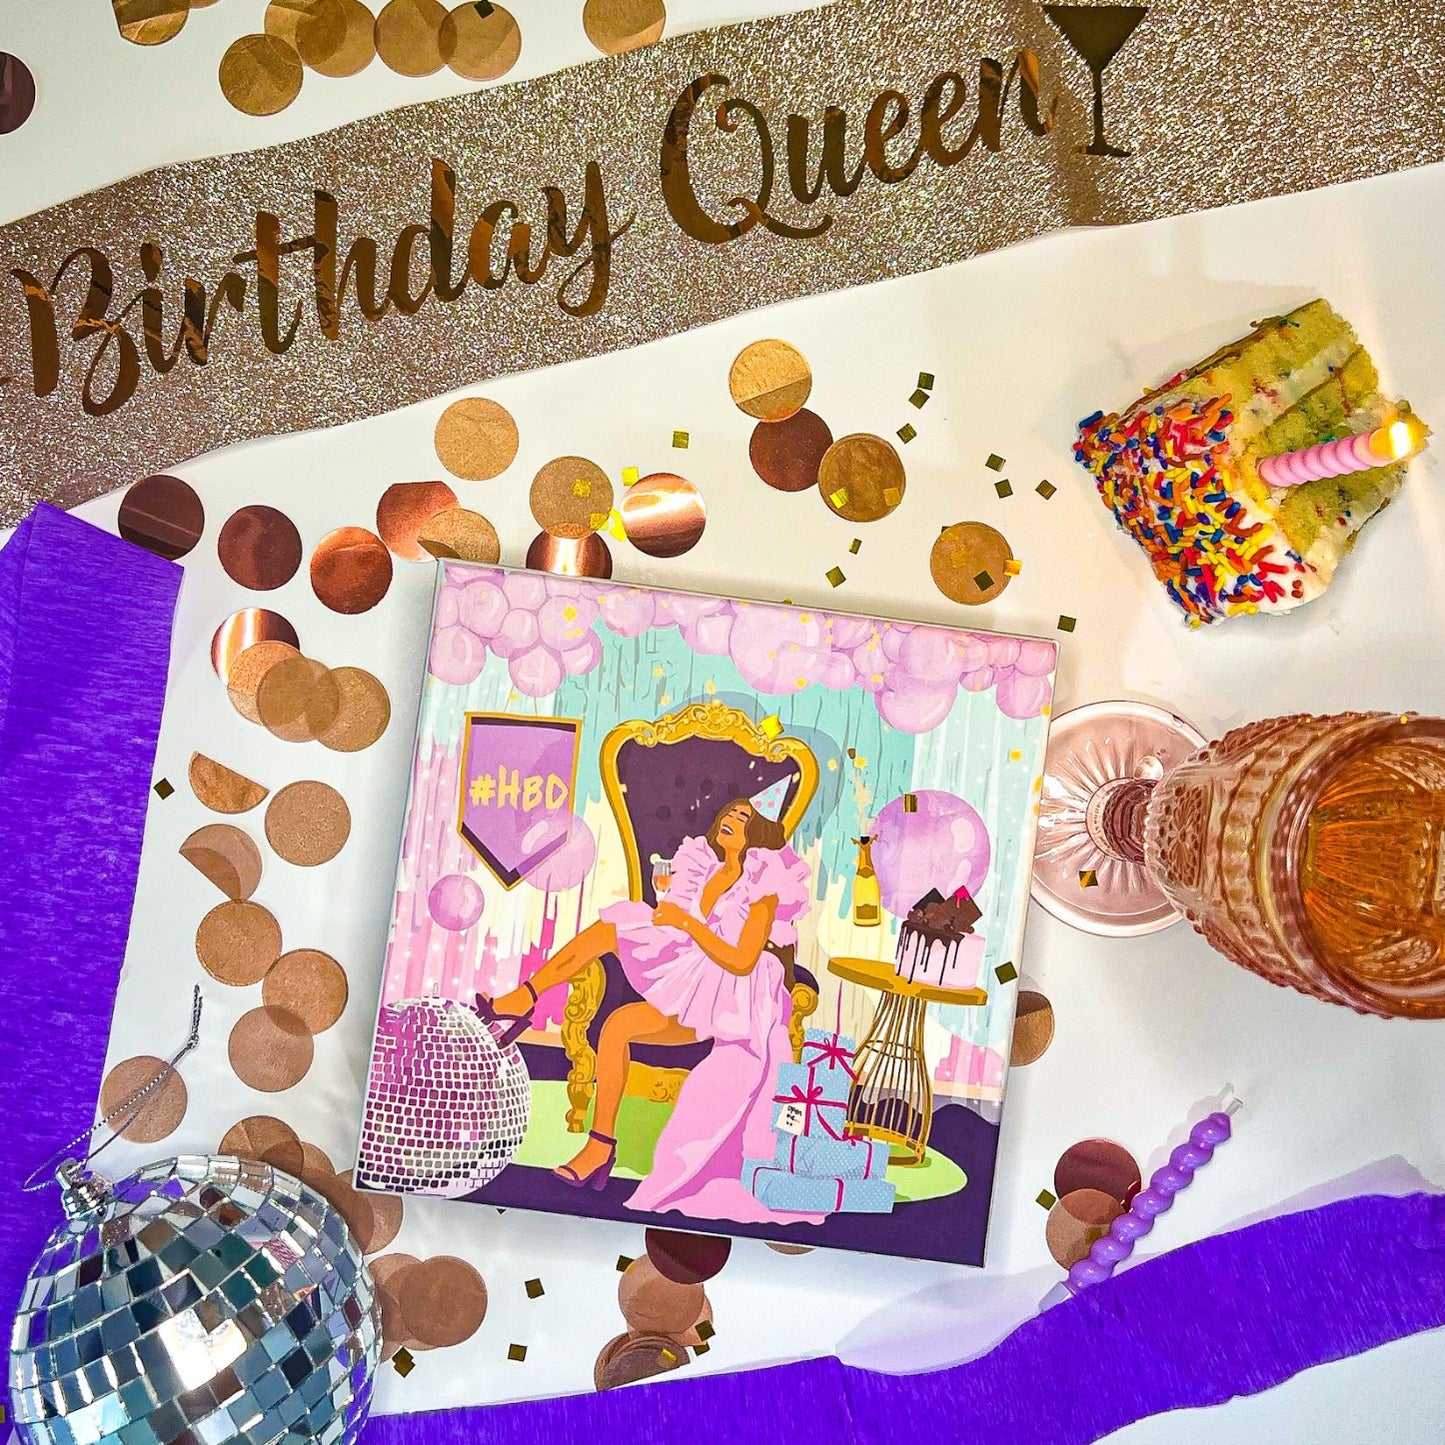 puzzle with birthday cake and decorations